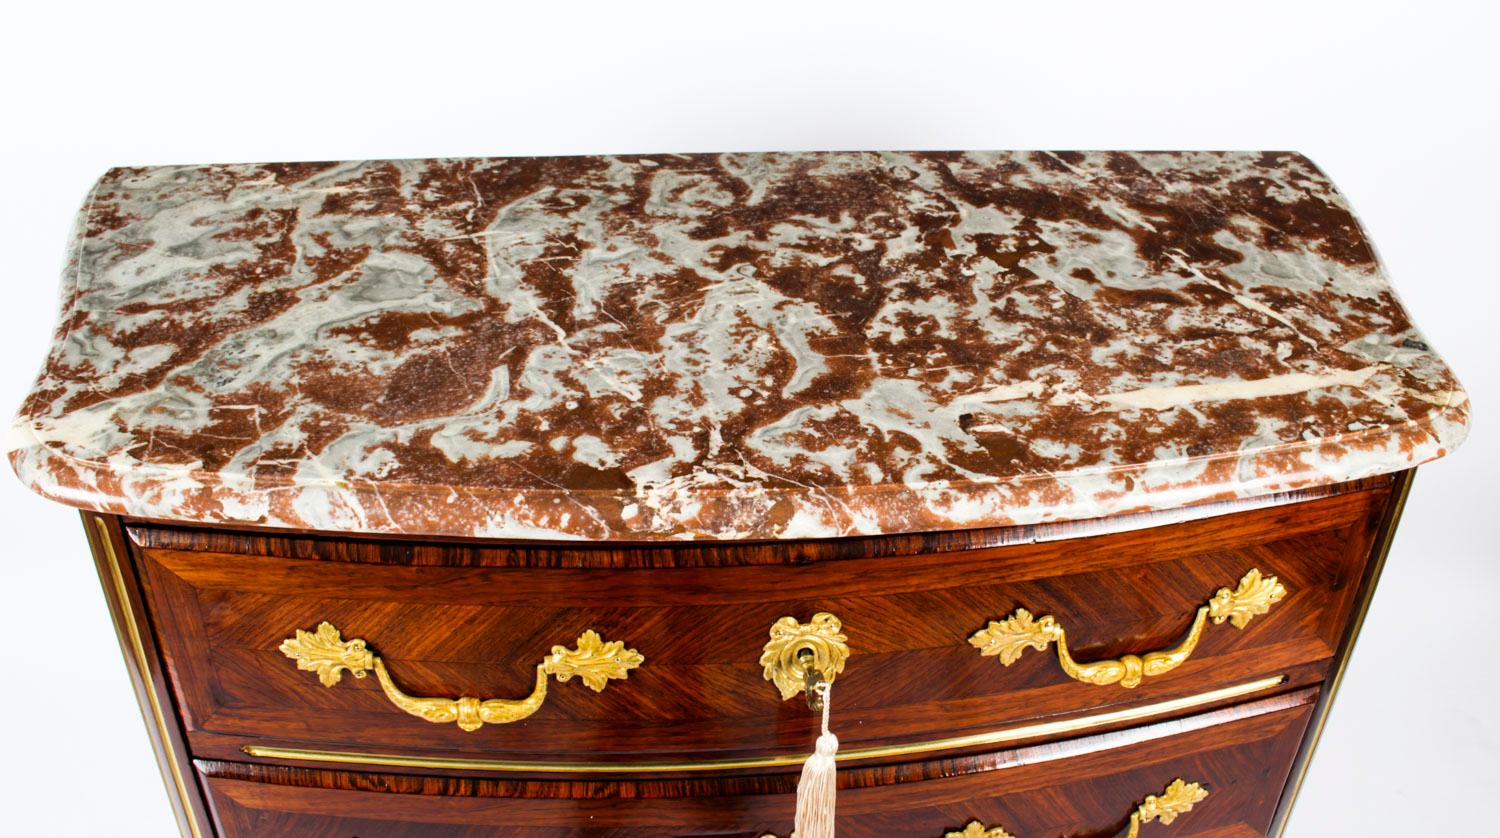 French Antique Marble Topped Ormolu-Mounted Goncalo Alves Commode Chest, 19th Century